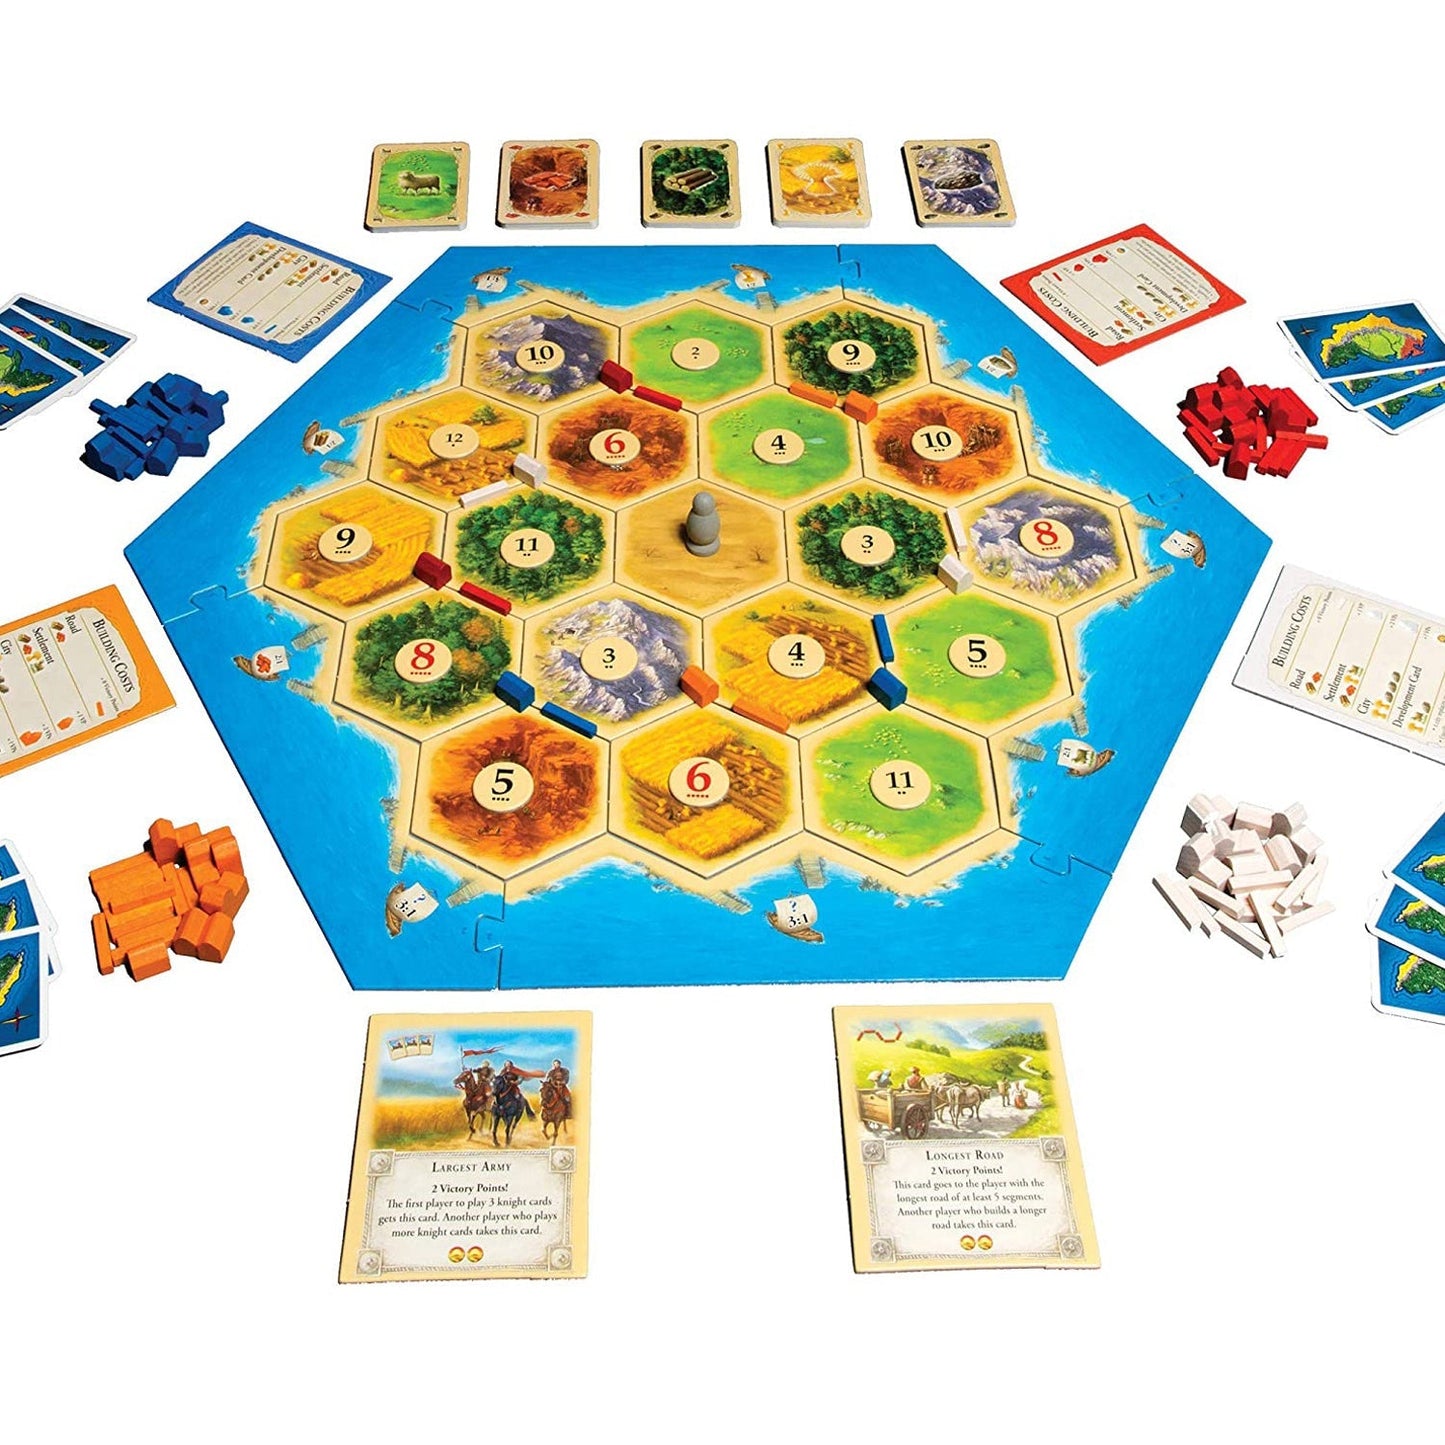 4659 Catan Board Game Extension Allowing a Total of 5 to 6 Players for The Catan Board Game | Family Board Game | Board Game for Adults and Family | Adventure Board Game (Pack of 1) DeoDap